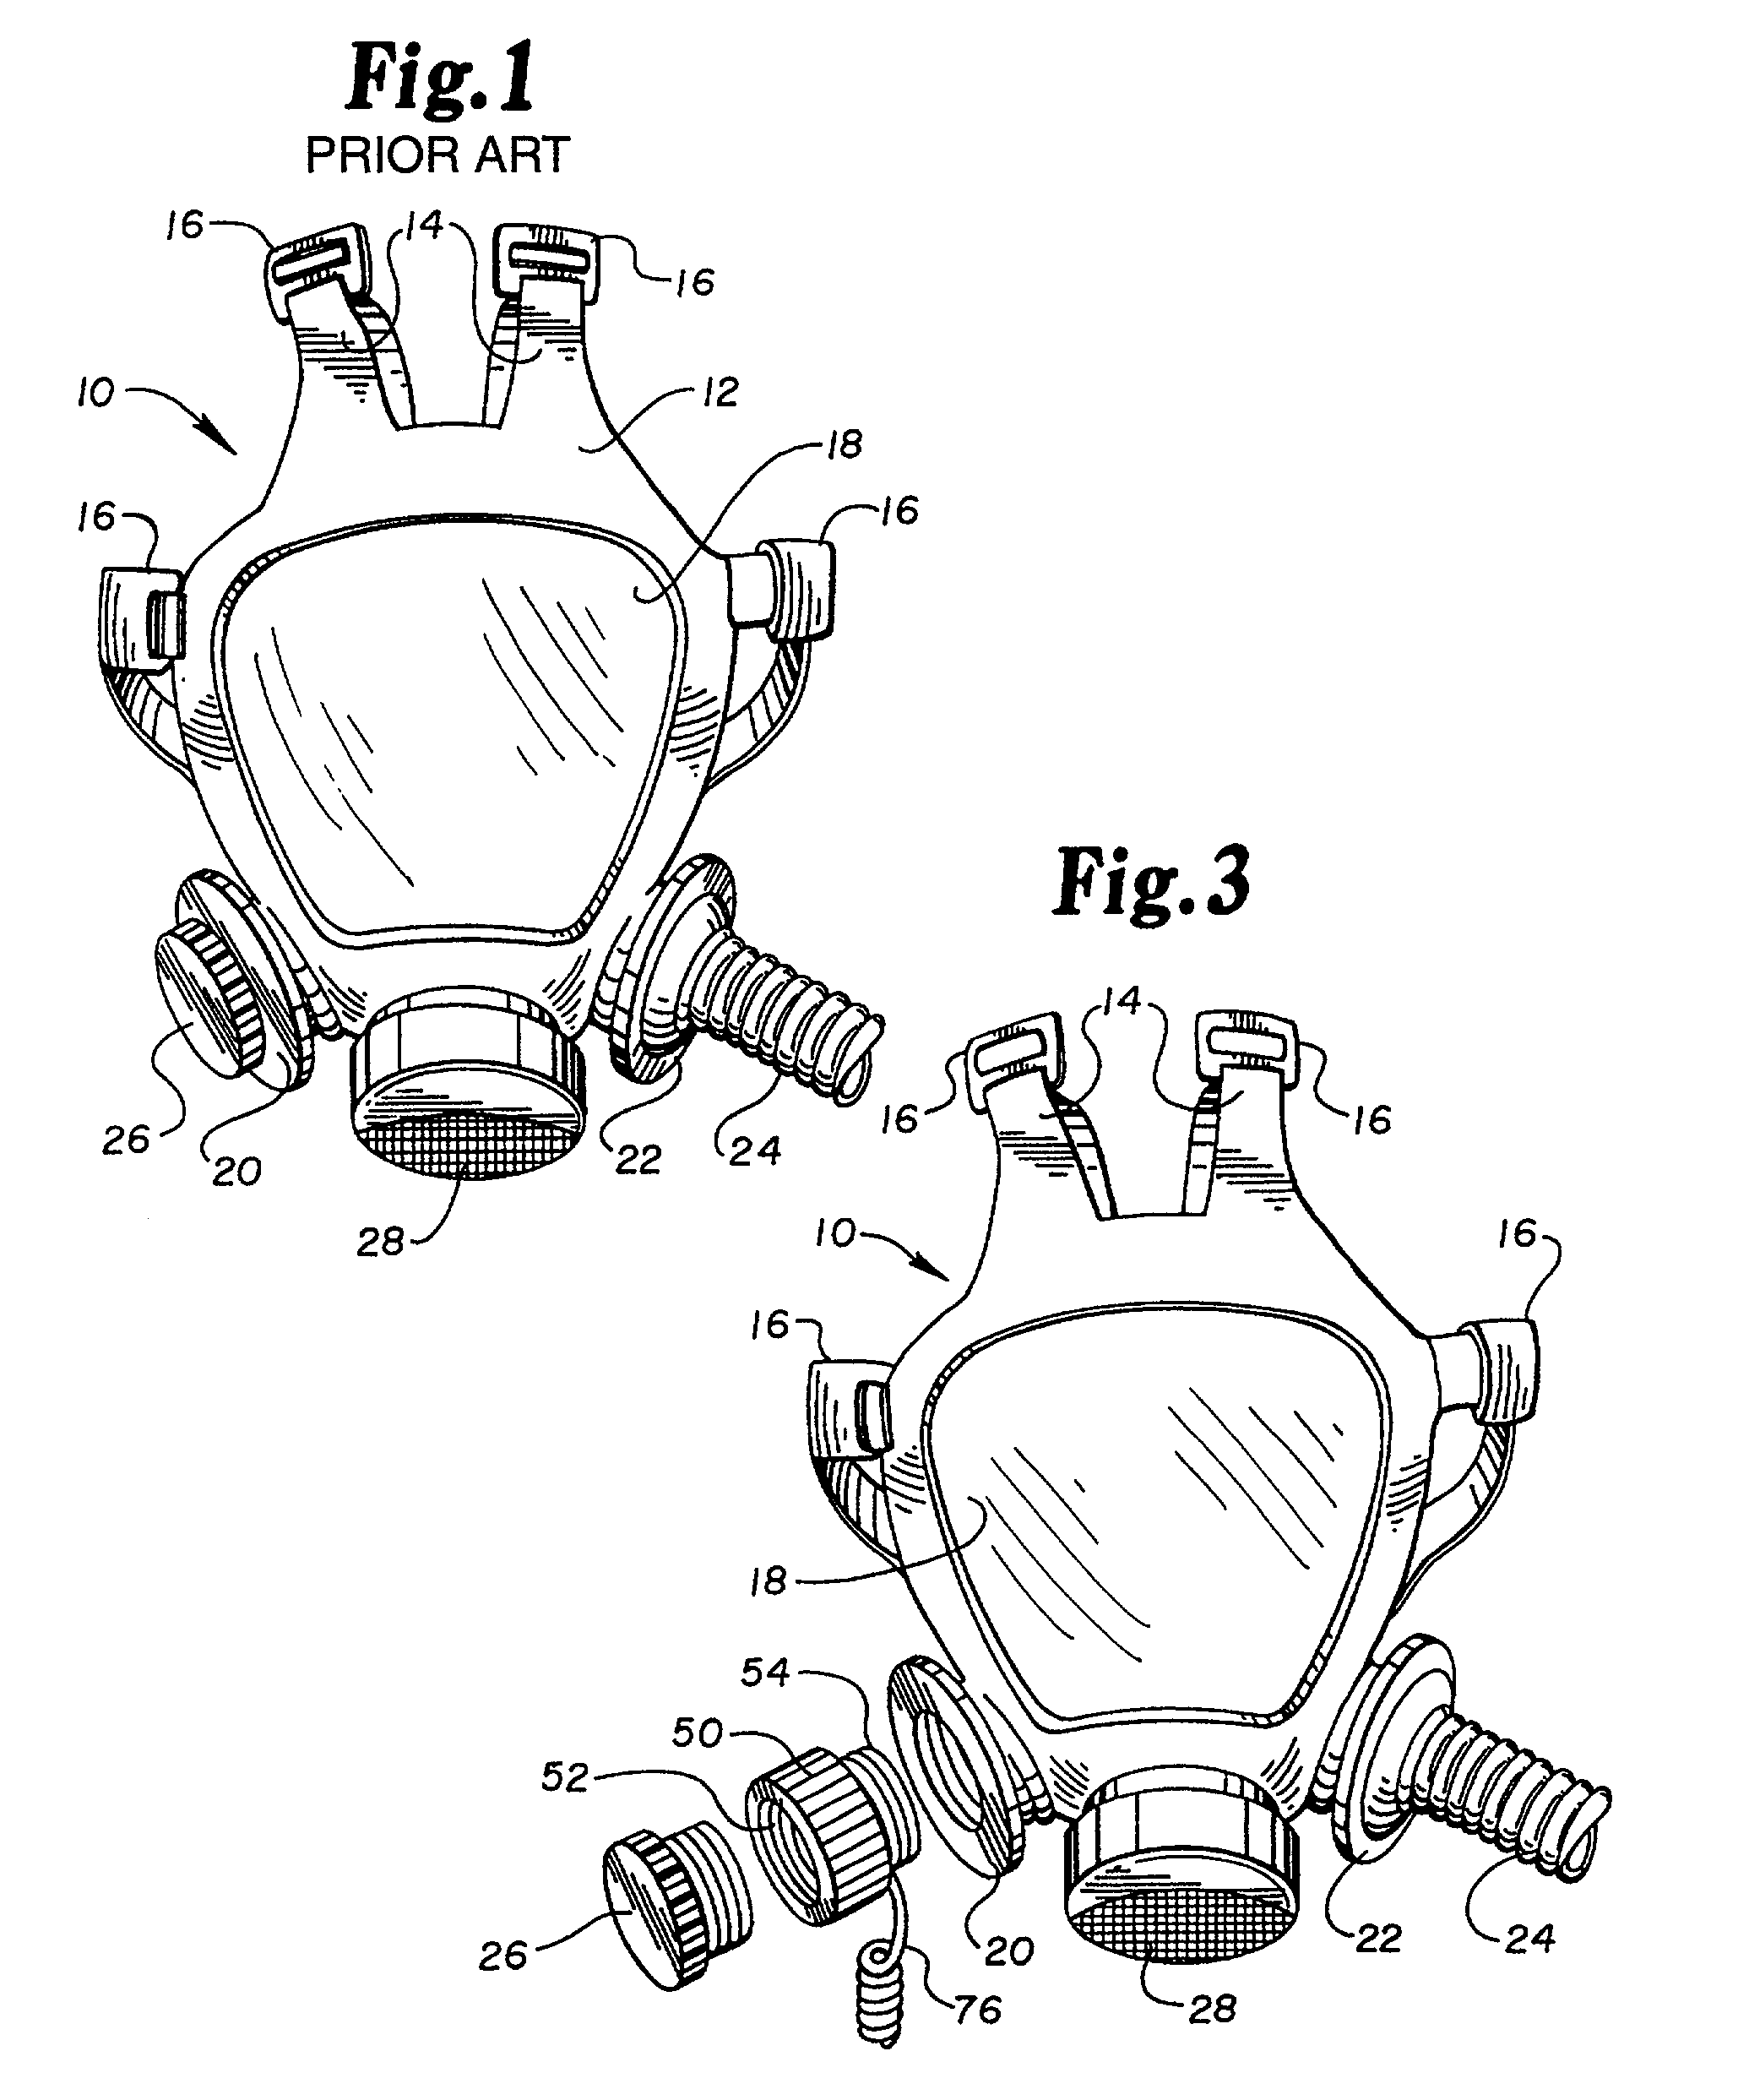 Speech transmission adaptor for use with a respirator mask